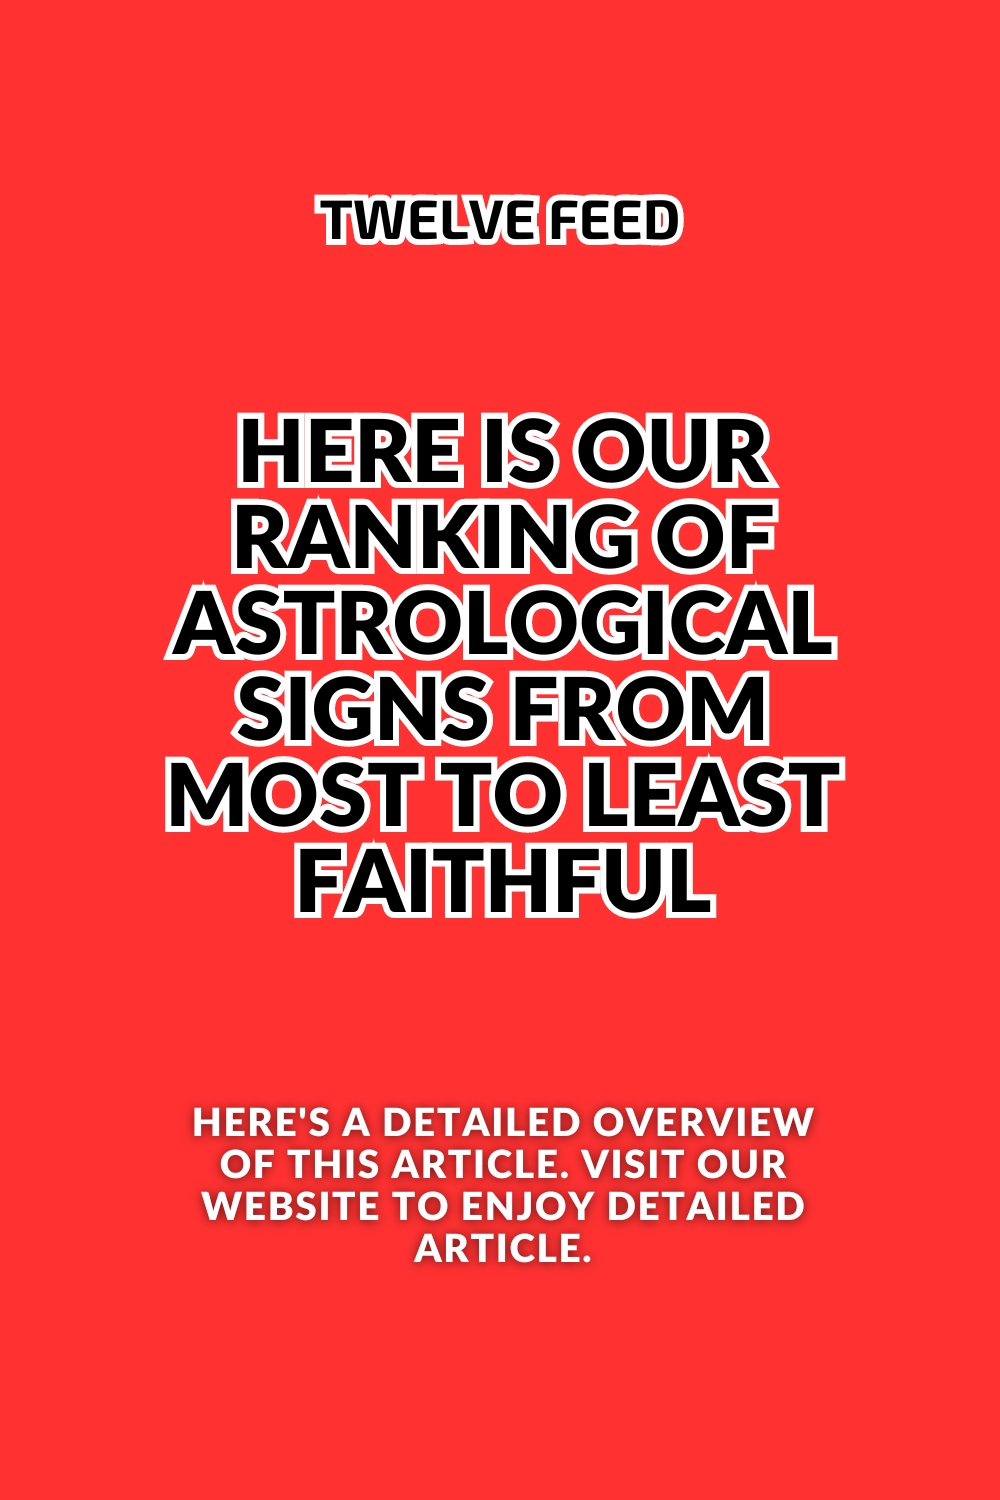 Here Is Our Ranking Of Astrological Signs From Most To Least Faithful